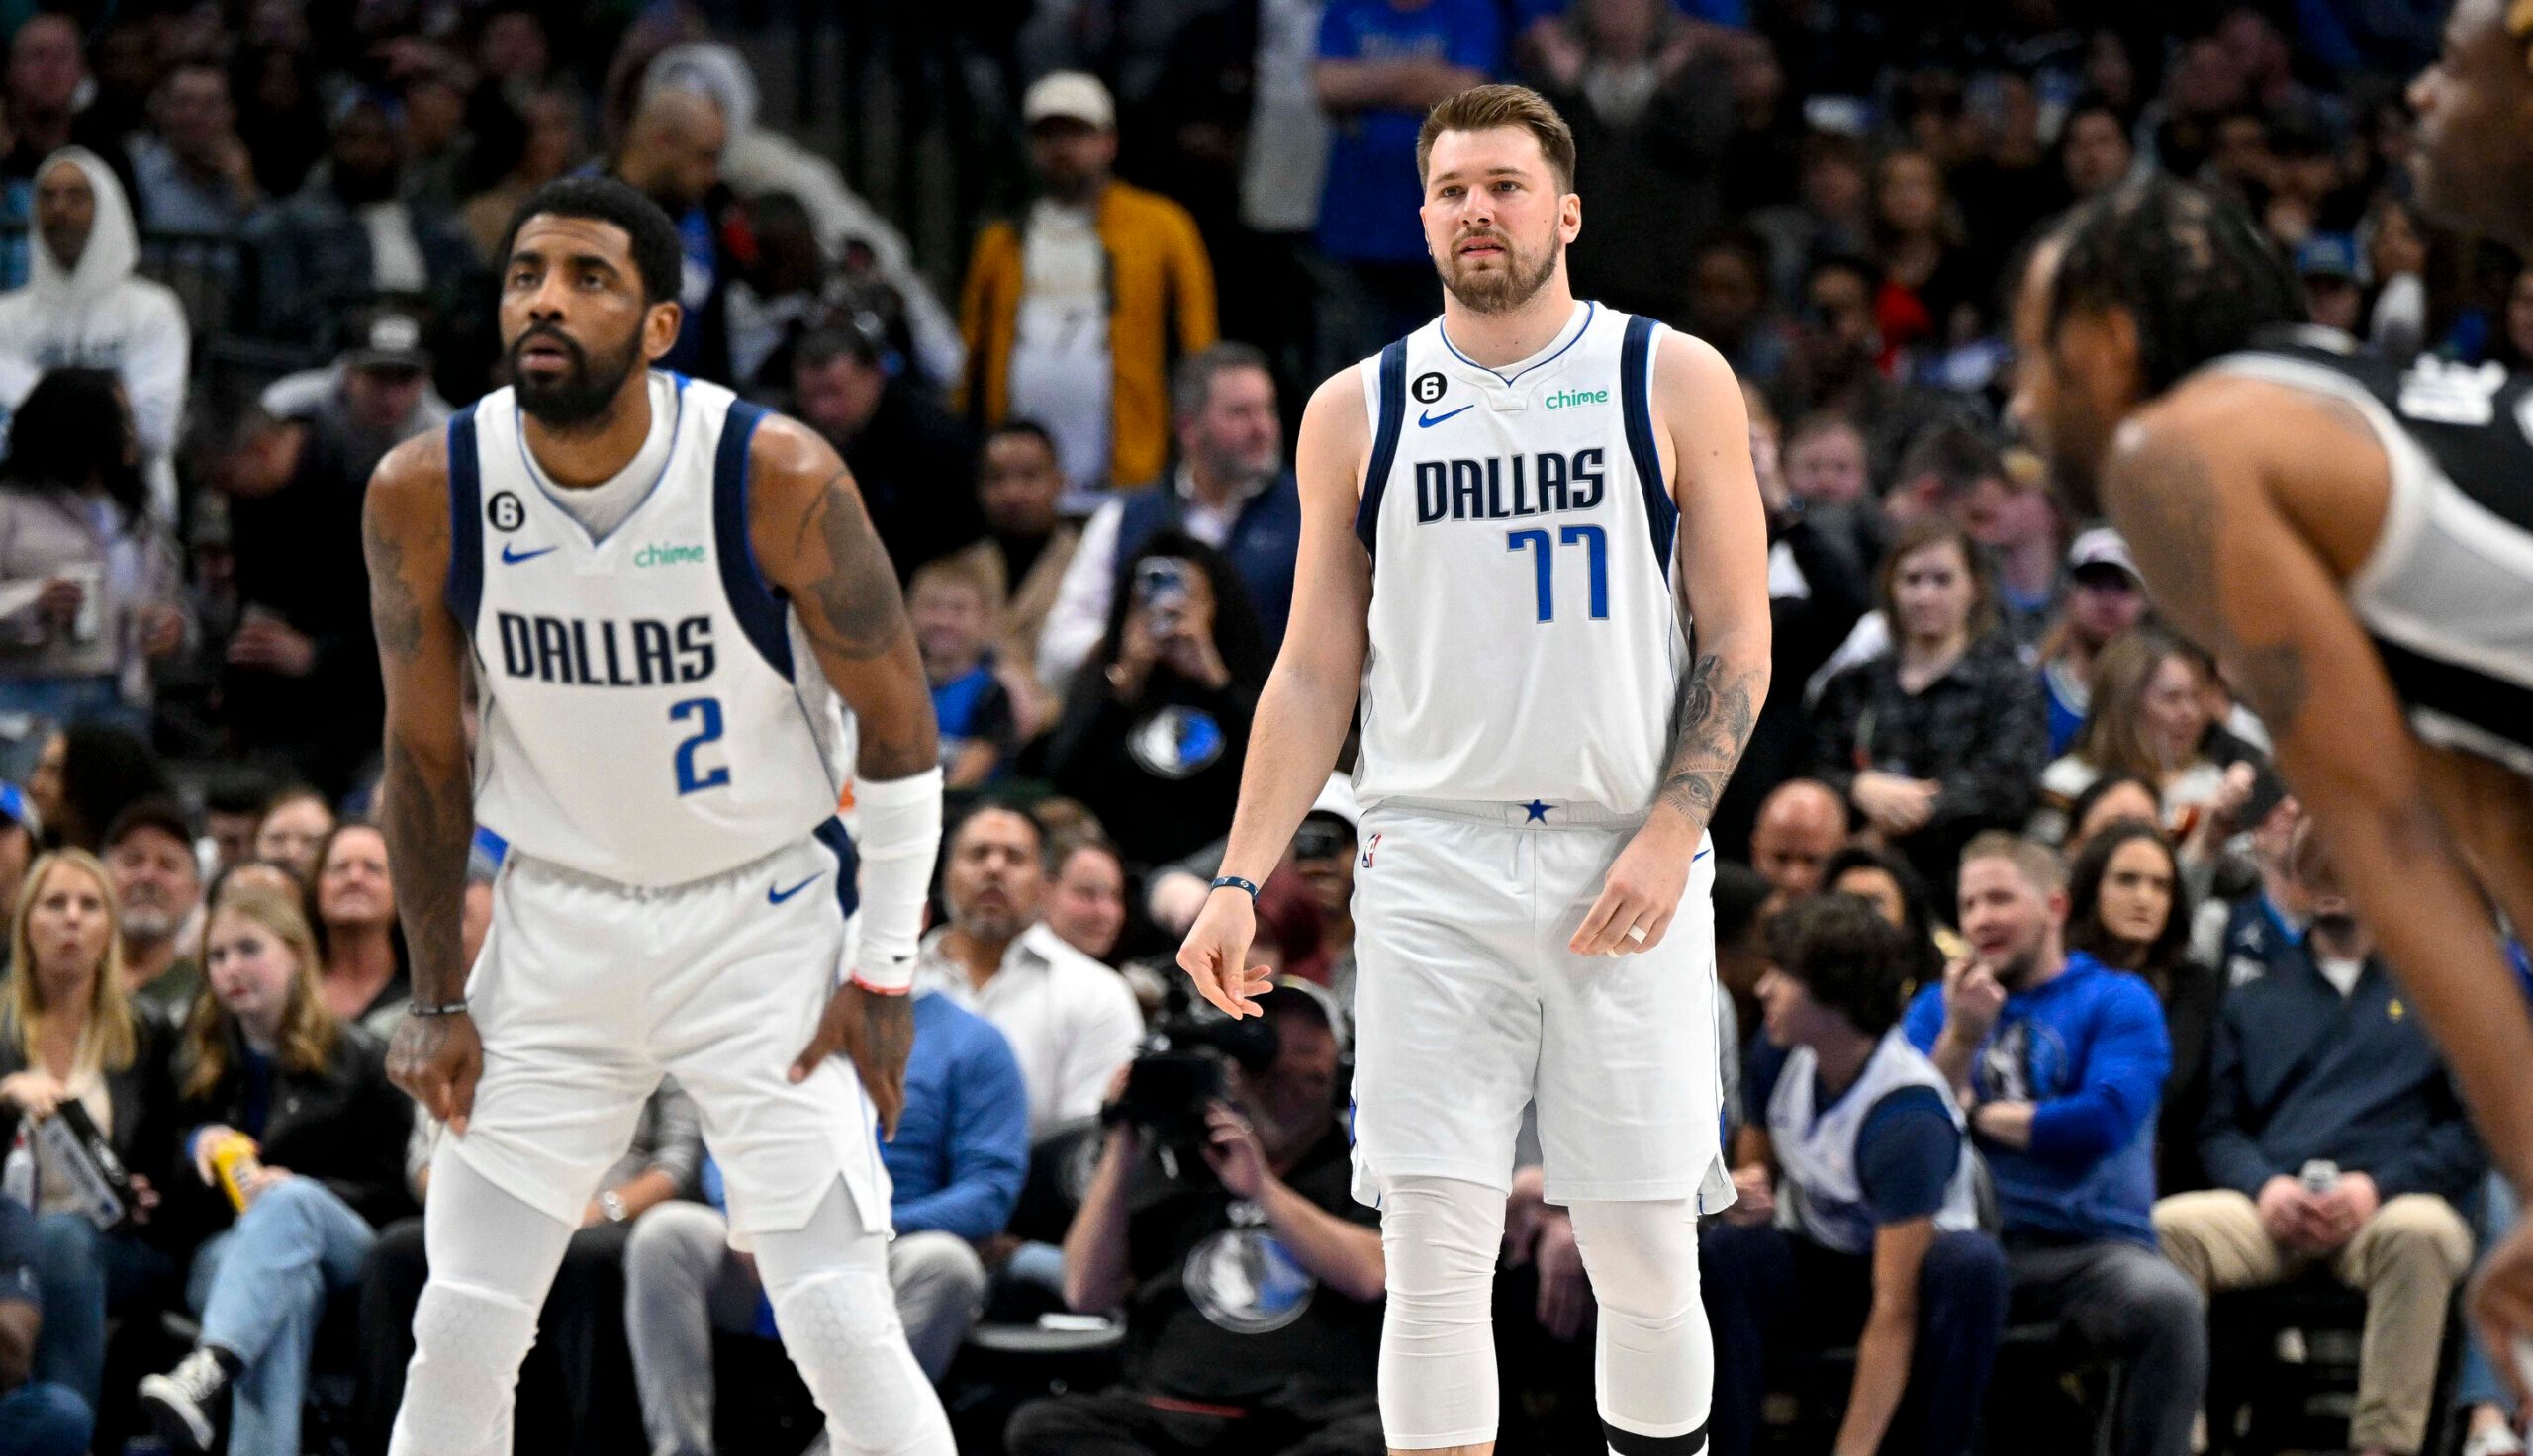 Luka Doncic, Kyrie Irving lead Mavs to rout of Spurs